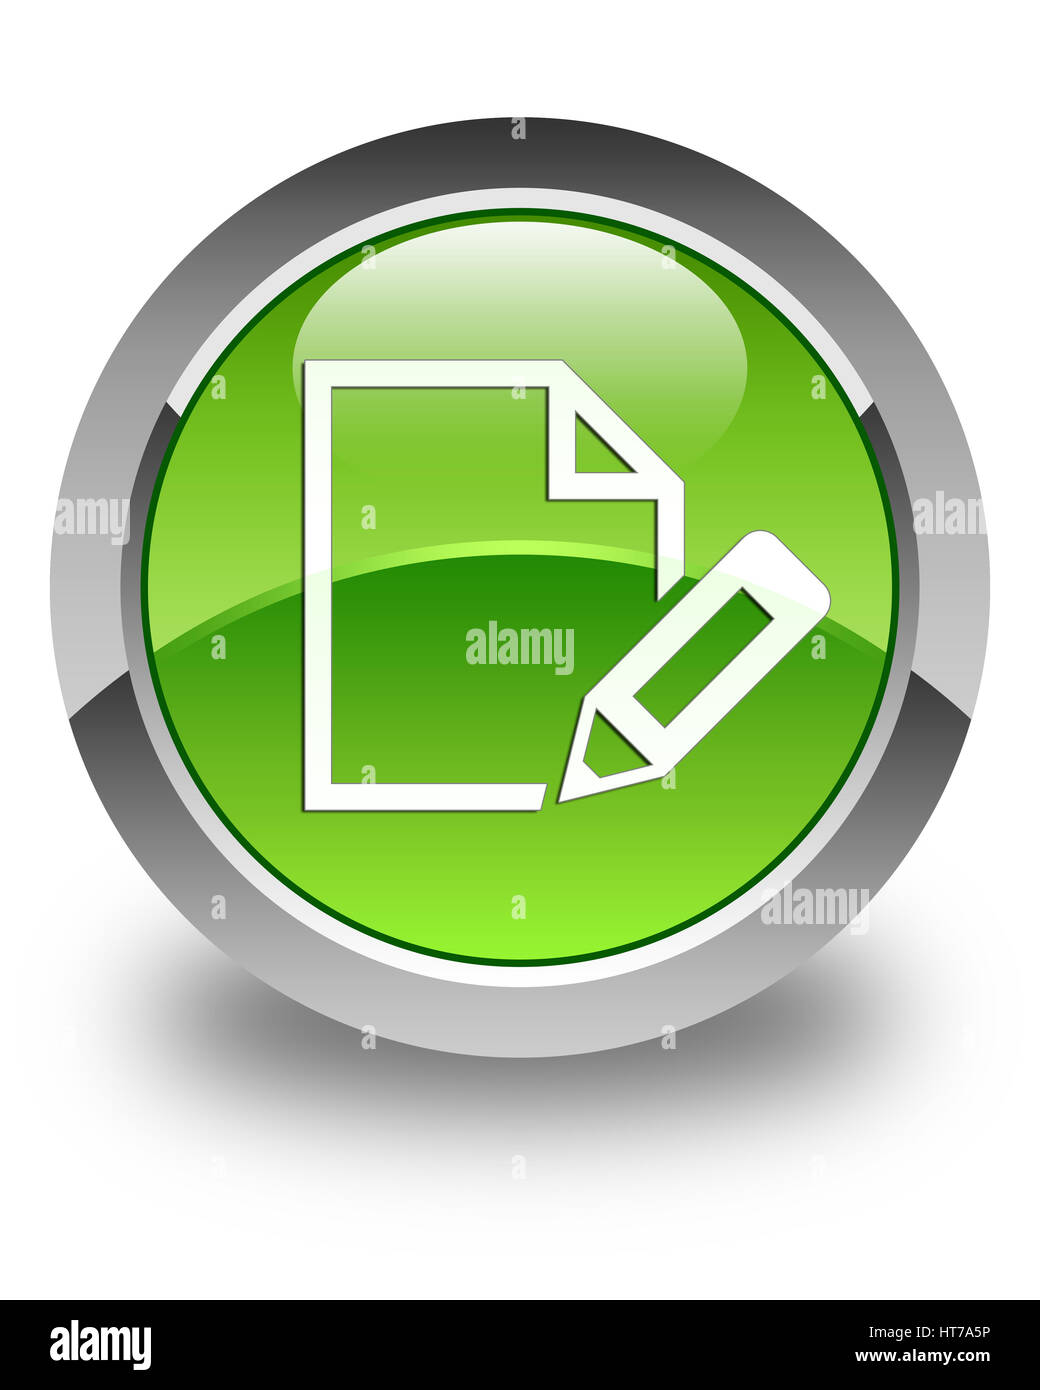 Edit document icon isolated on glossy green round button abstract illustration Stock Photo